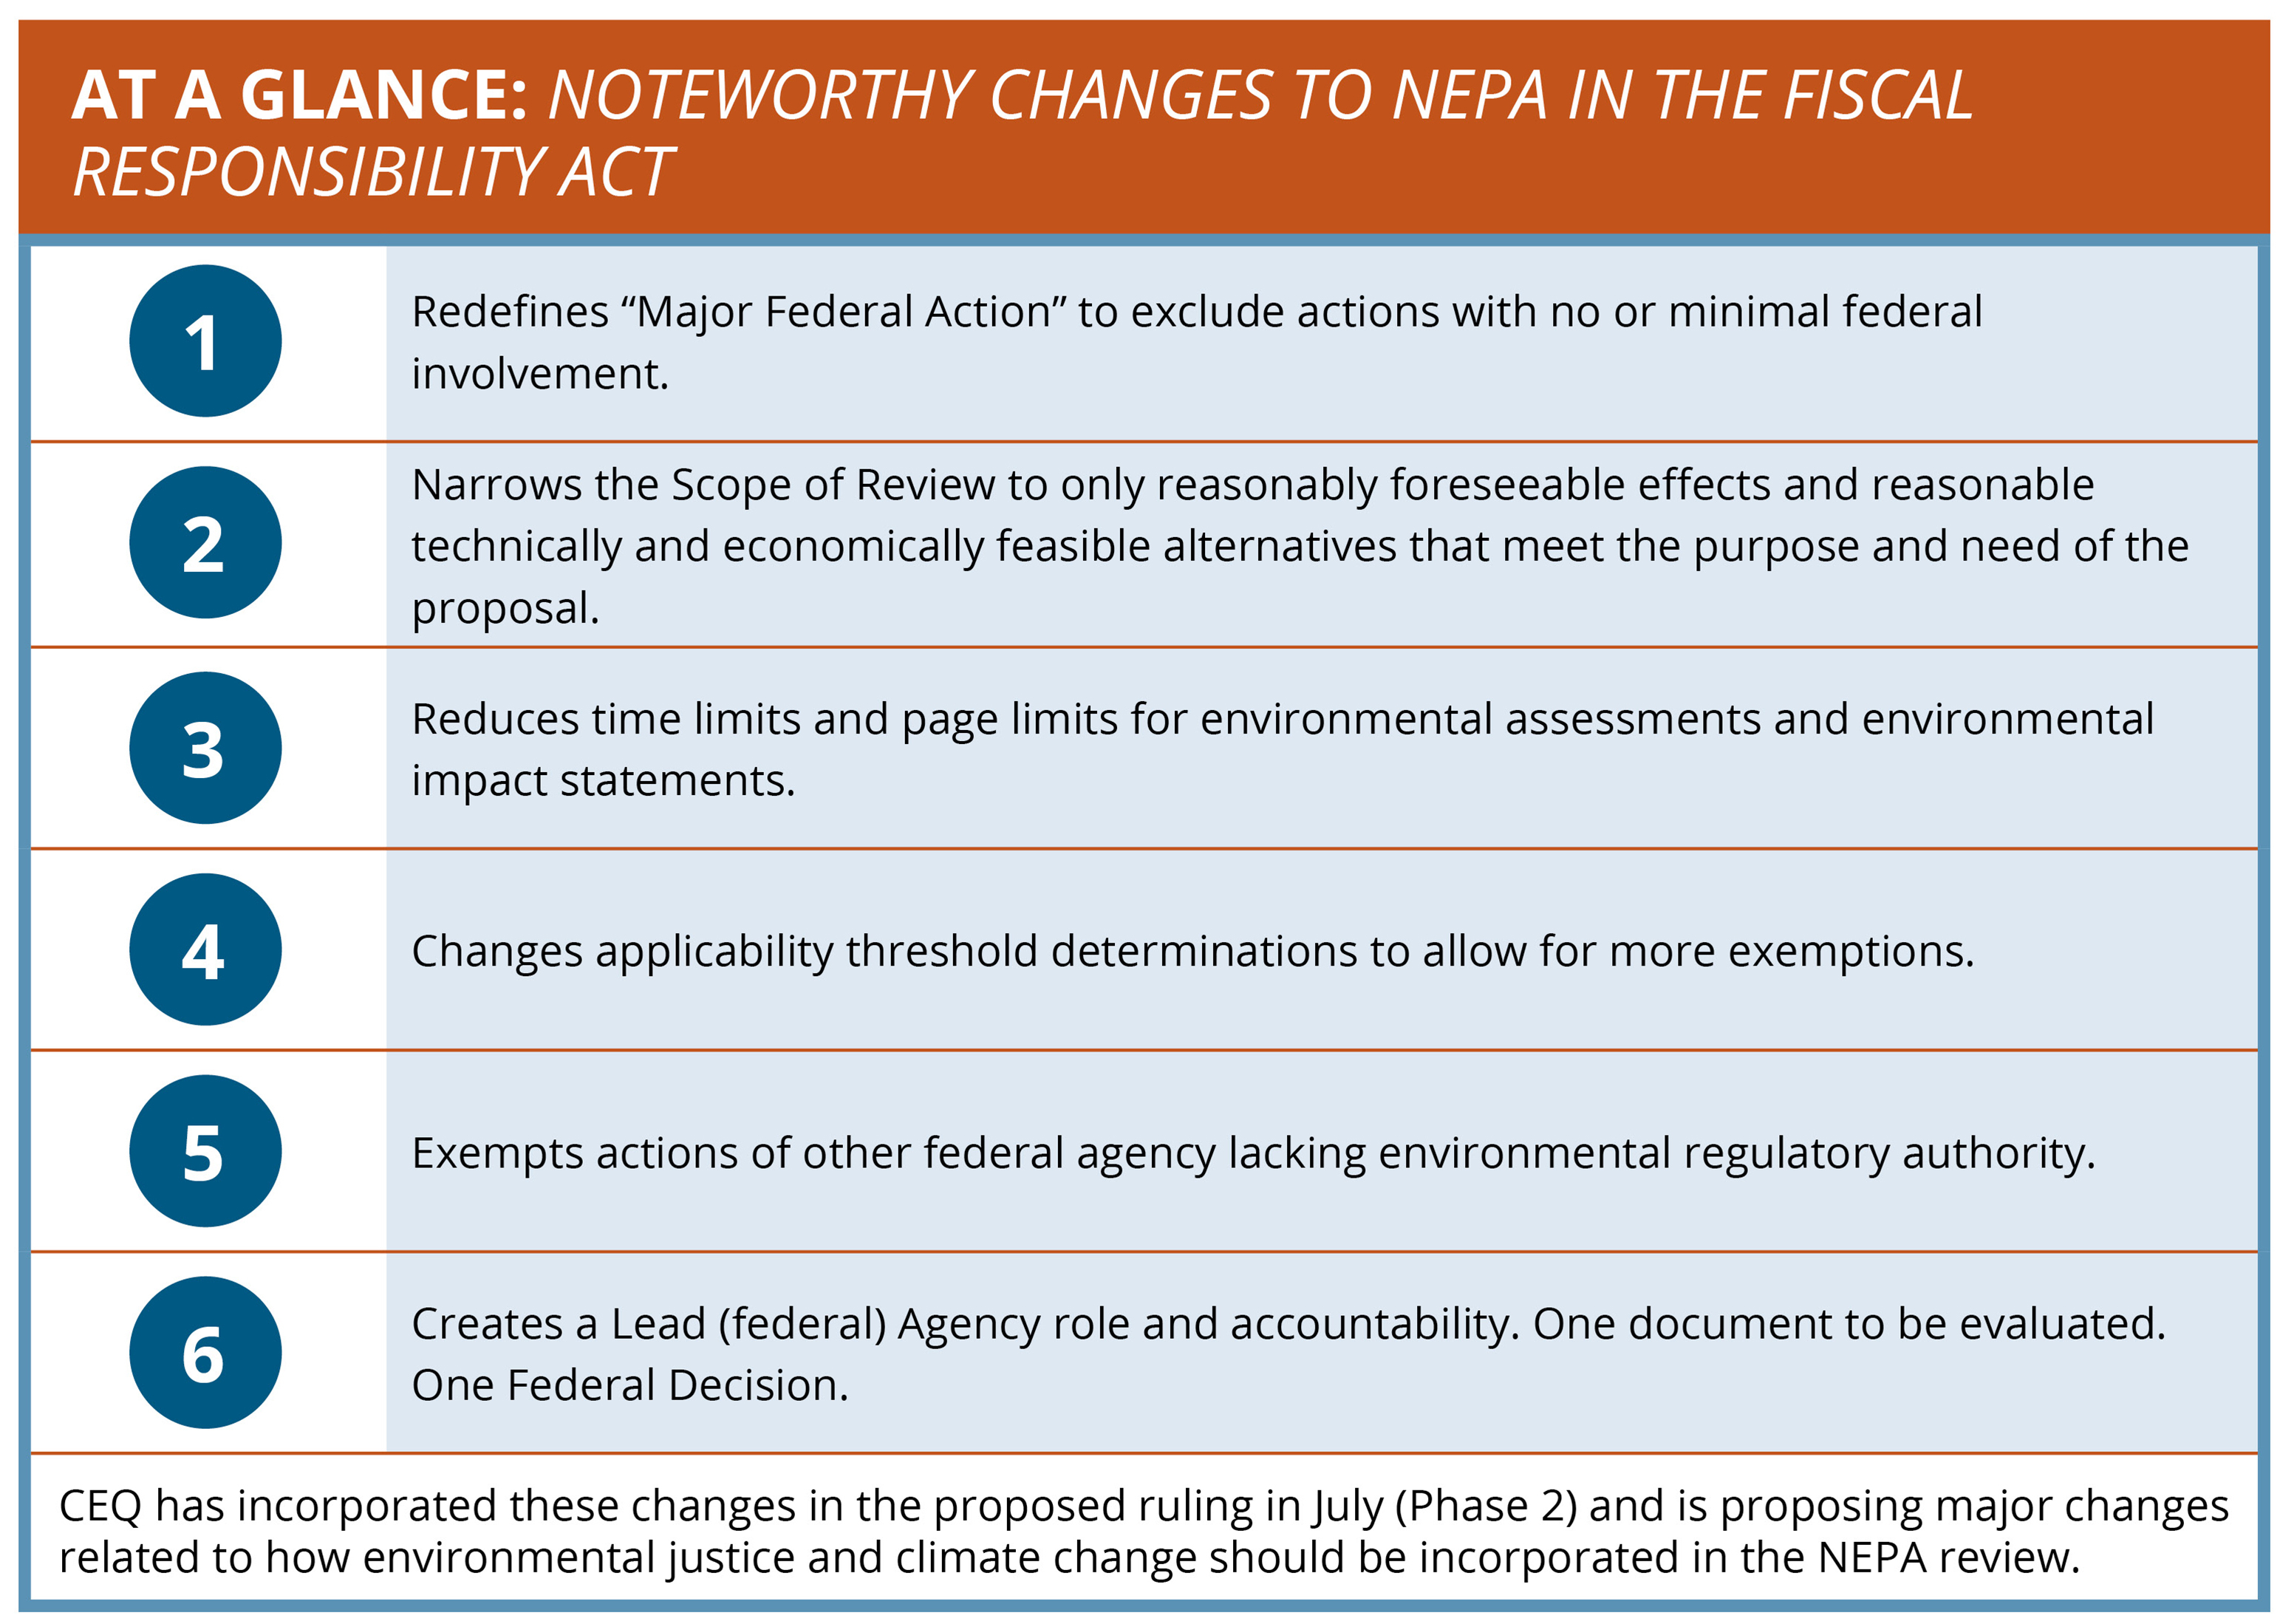 AT A GLANCE: NOTEWORTHY CHANGES TO NEPA IN THE FISCAL RESPONSIBILITY ACT